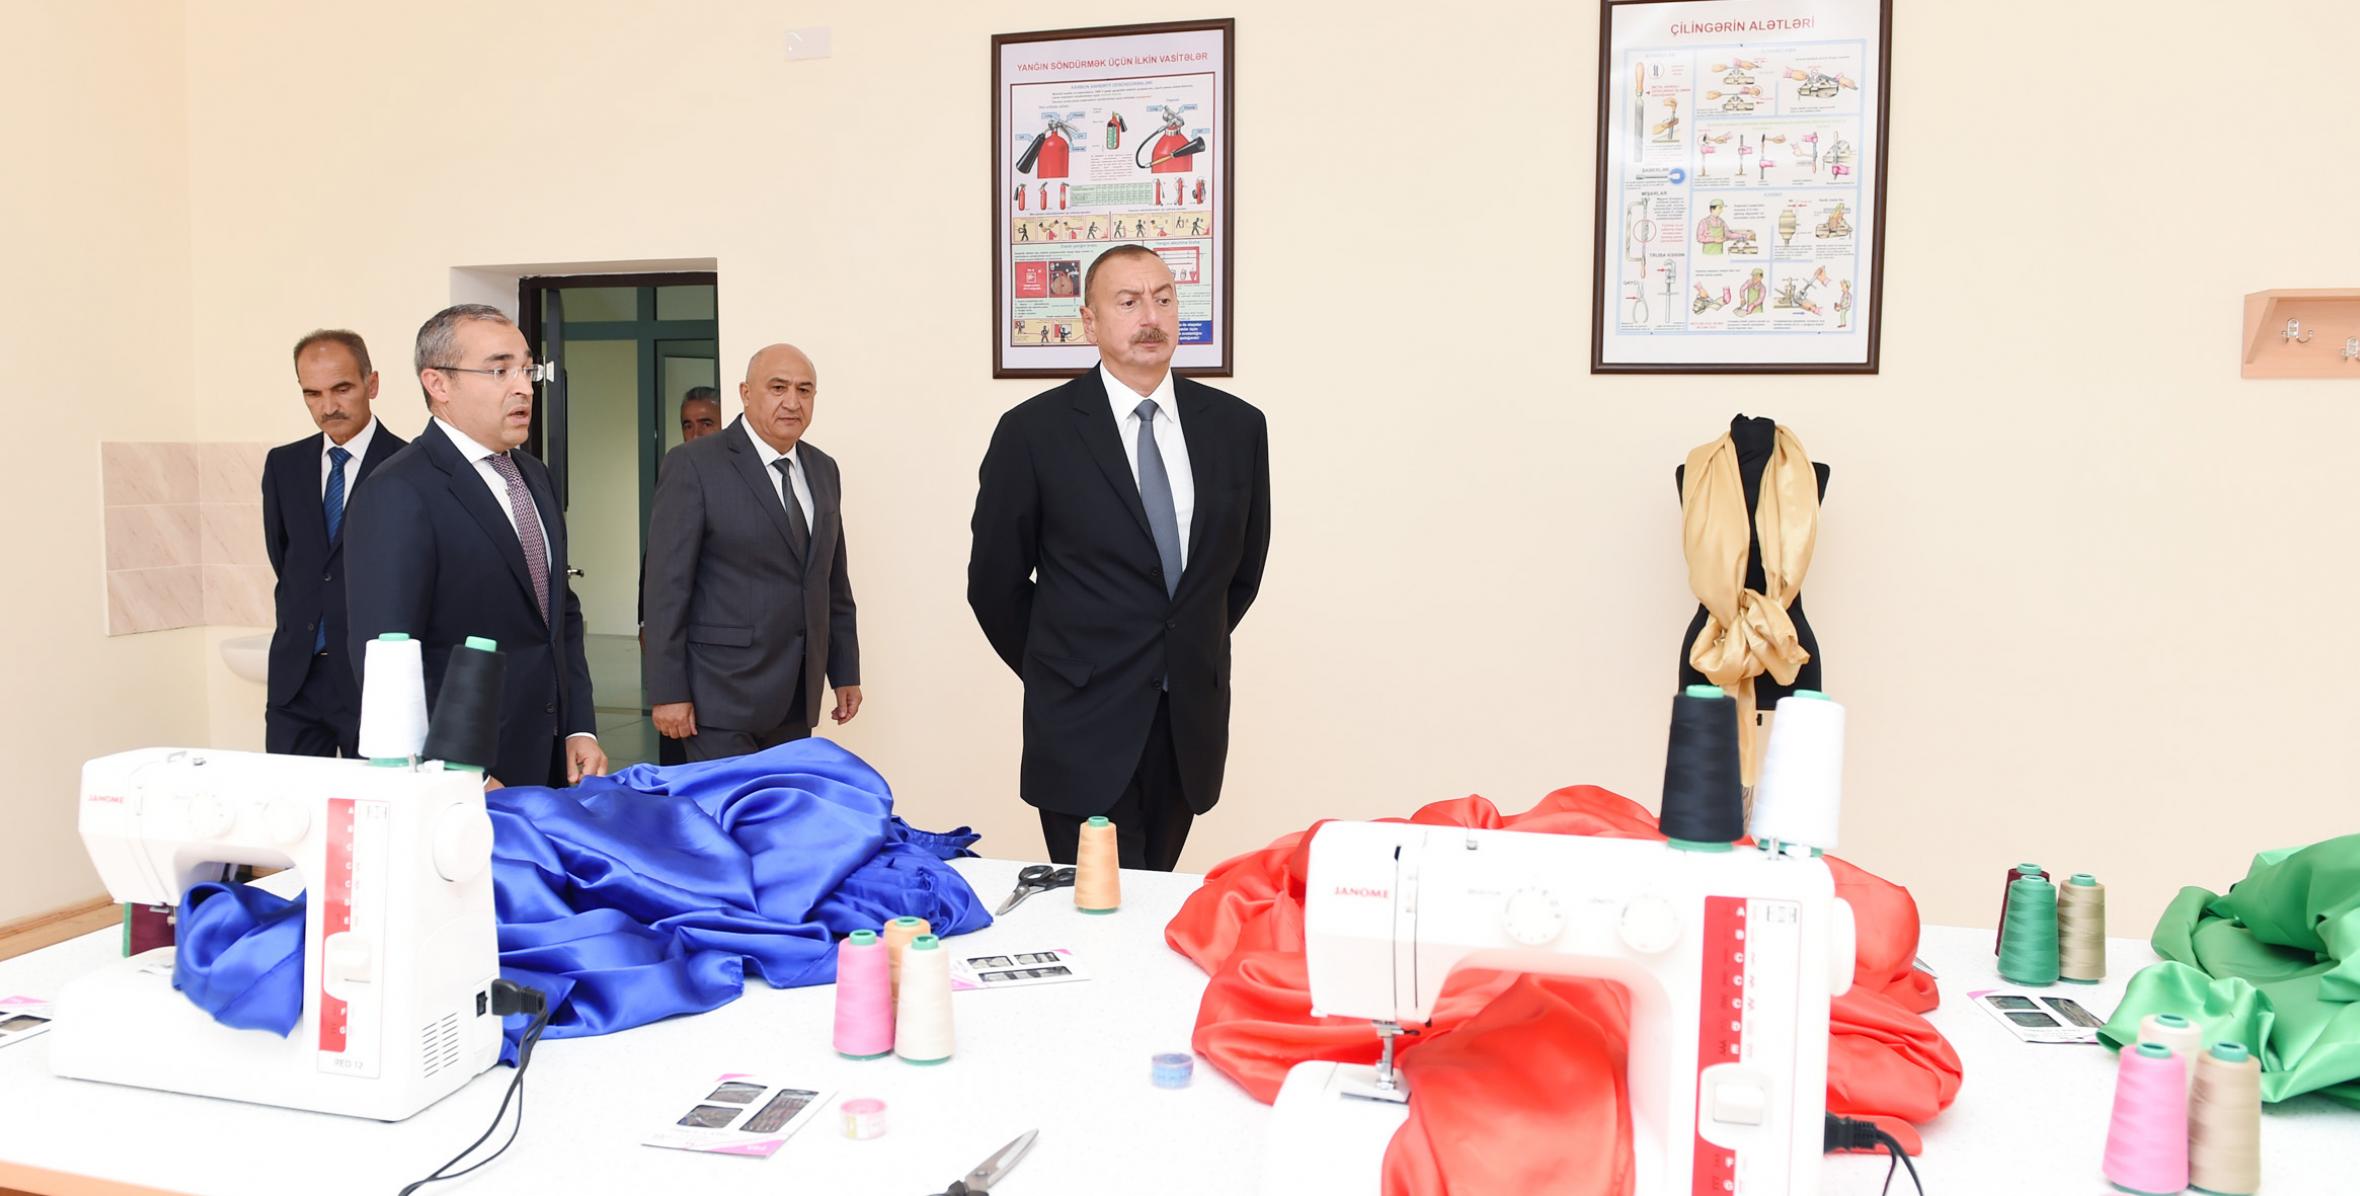 Ilham Aliyev opened new building of secondary school in Hil village, Qusar